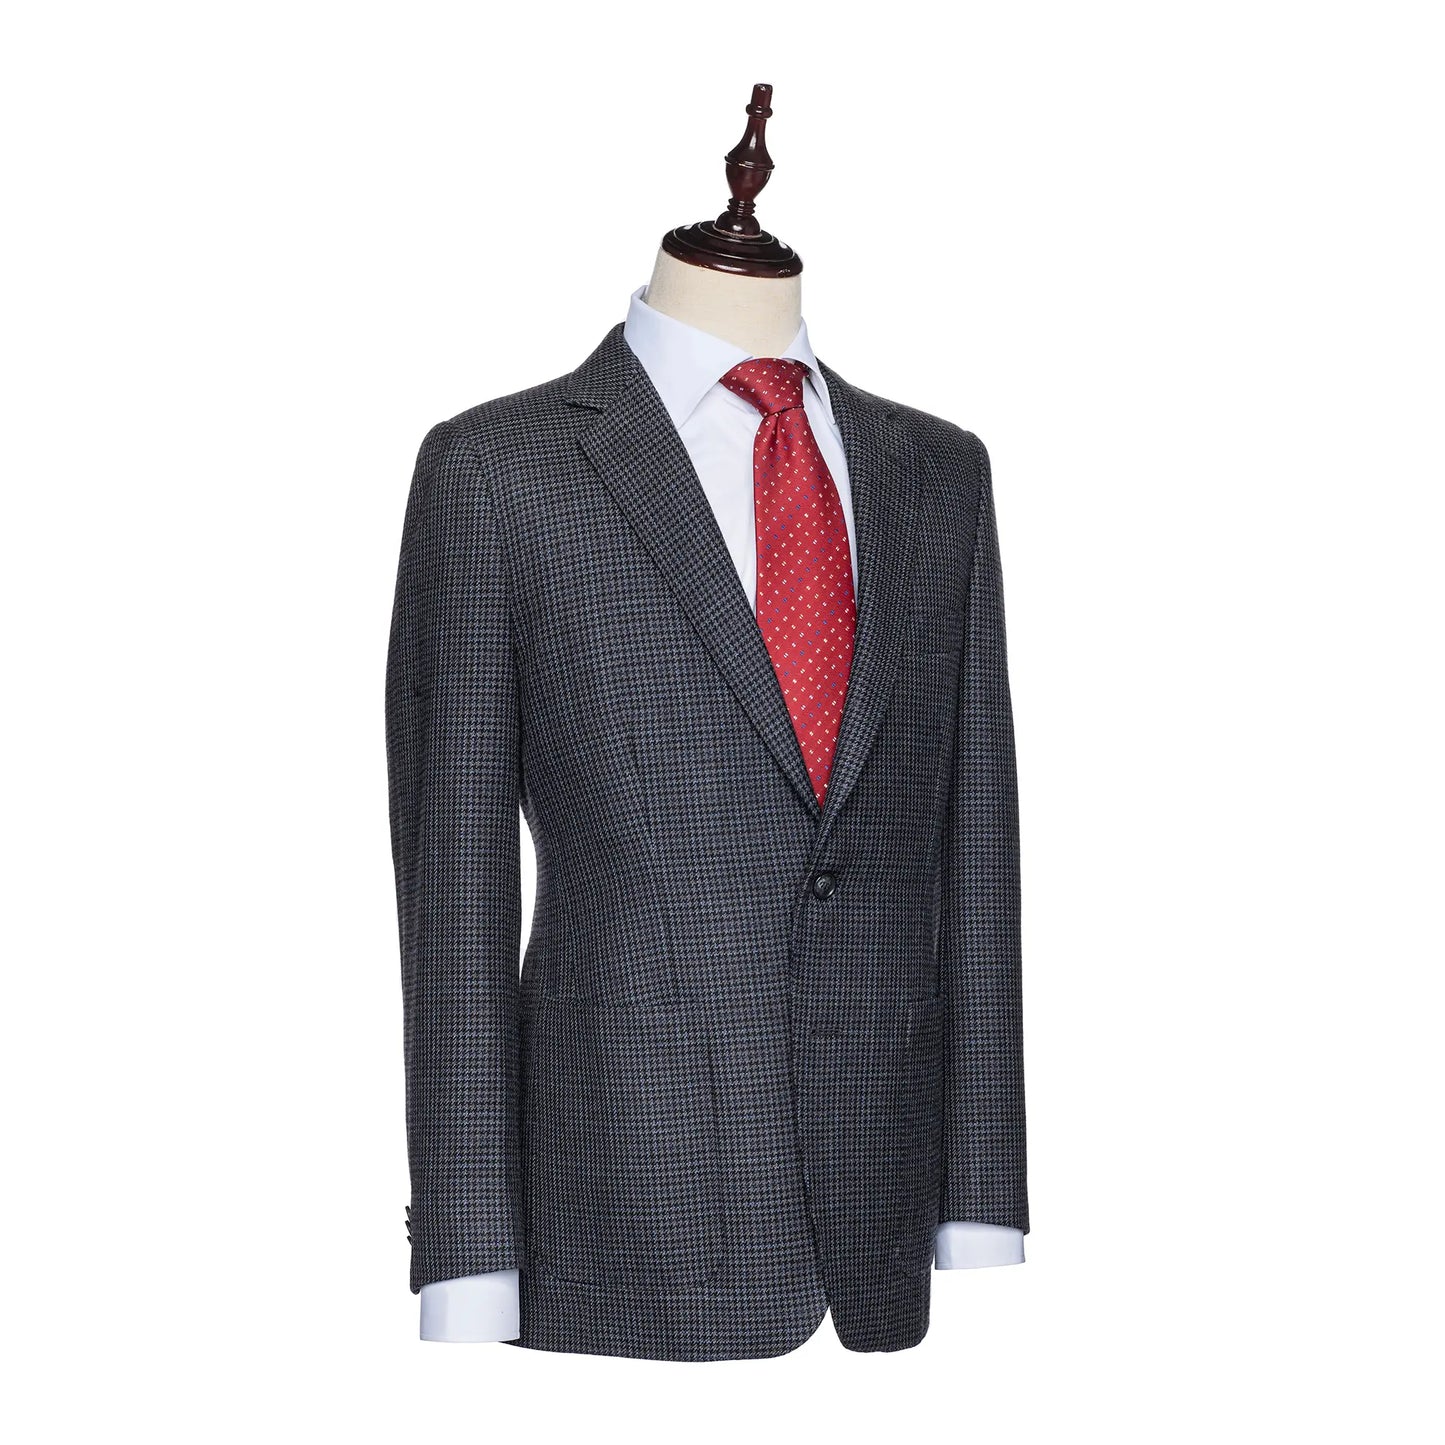 Black Brown Houndstooth Jacket - Larimars Clothing Men's Formal and casual wear shirts